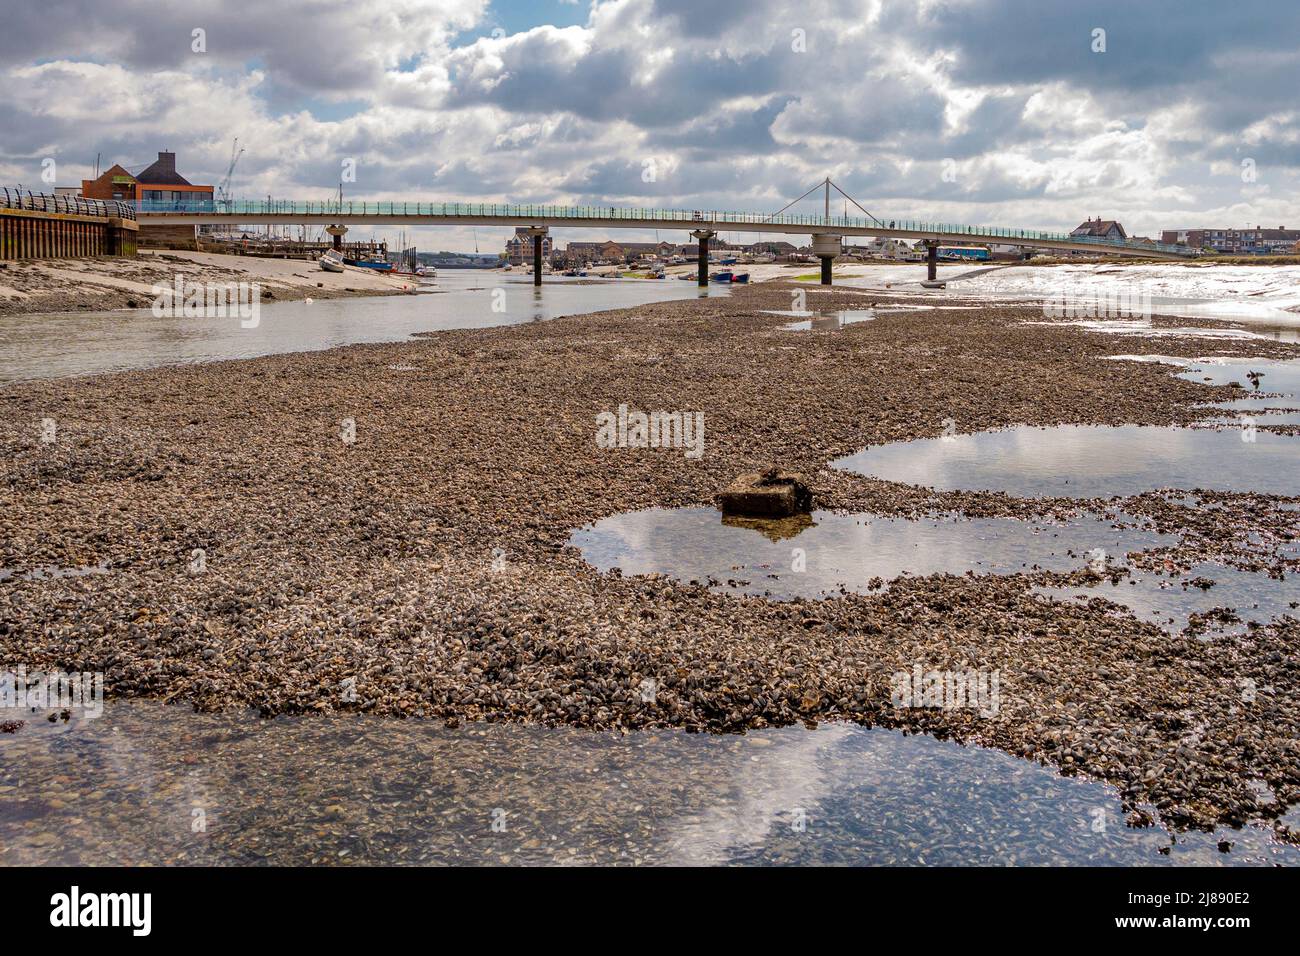 The River Adur at low tide, looking towards the footbridge & revealing an extensive river bed and an old mooring anchorage - Shoreham-By-Sea, Sussex. Stock Photo